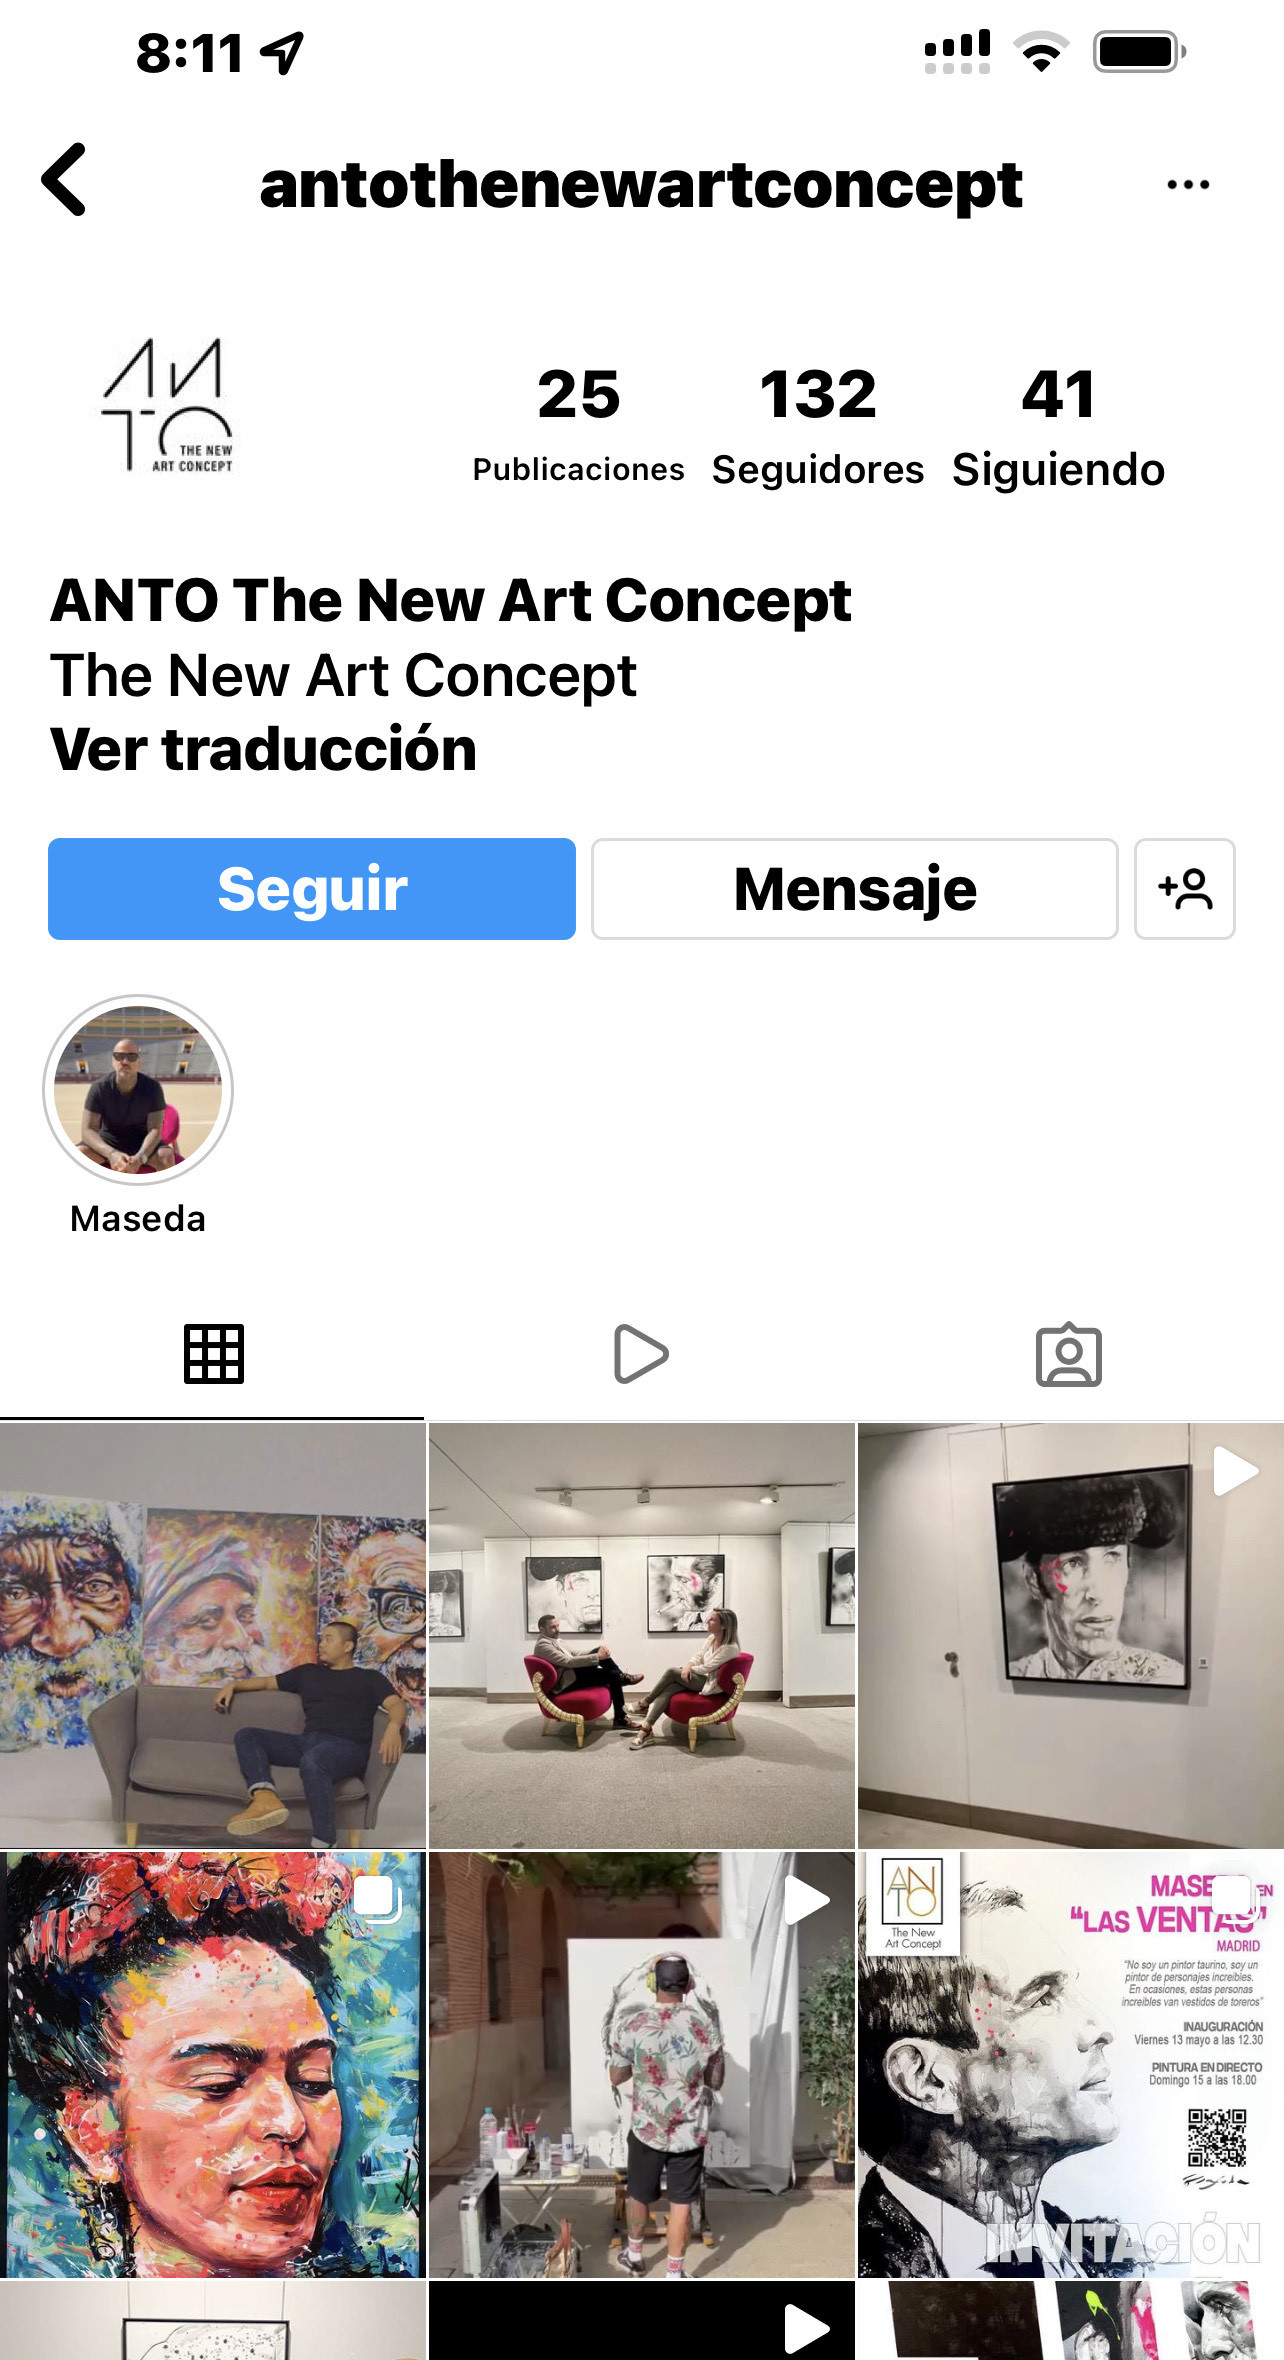 Instagram account of the alleged gallery